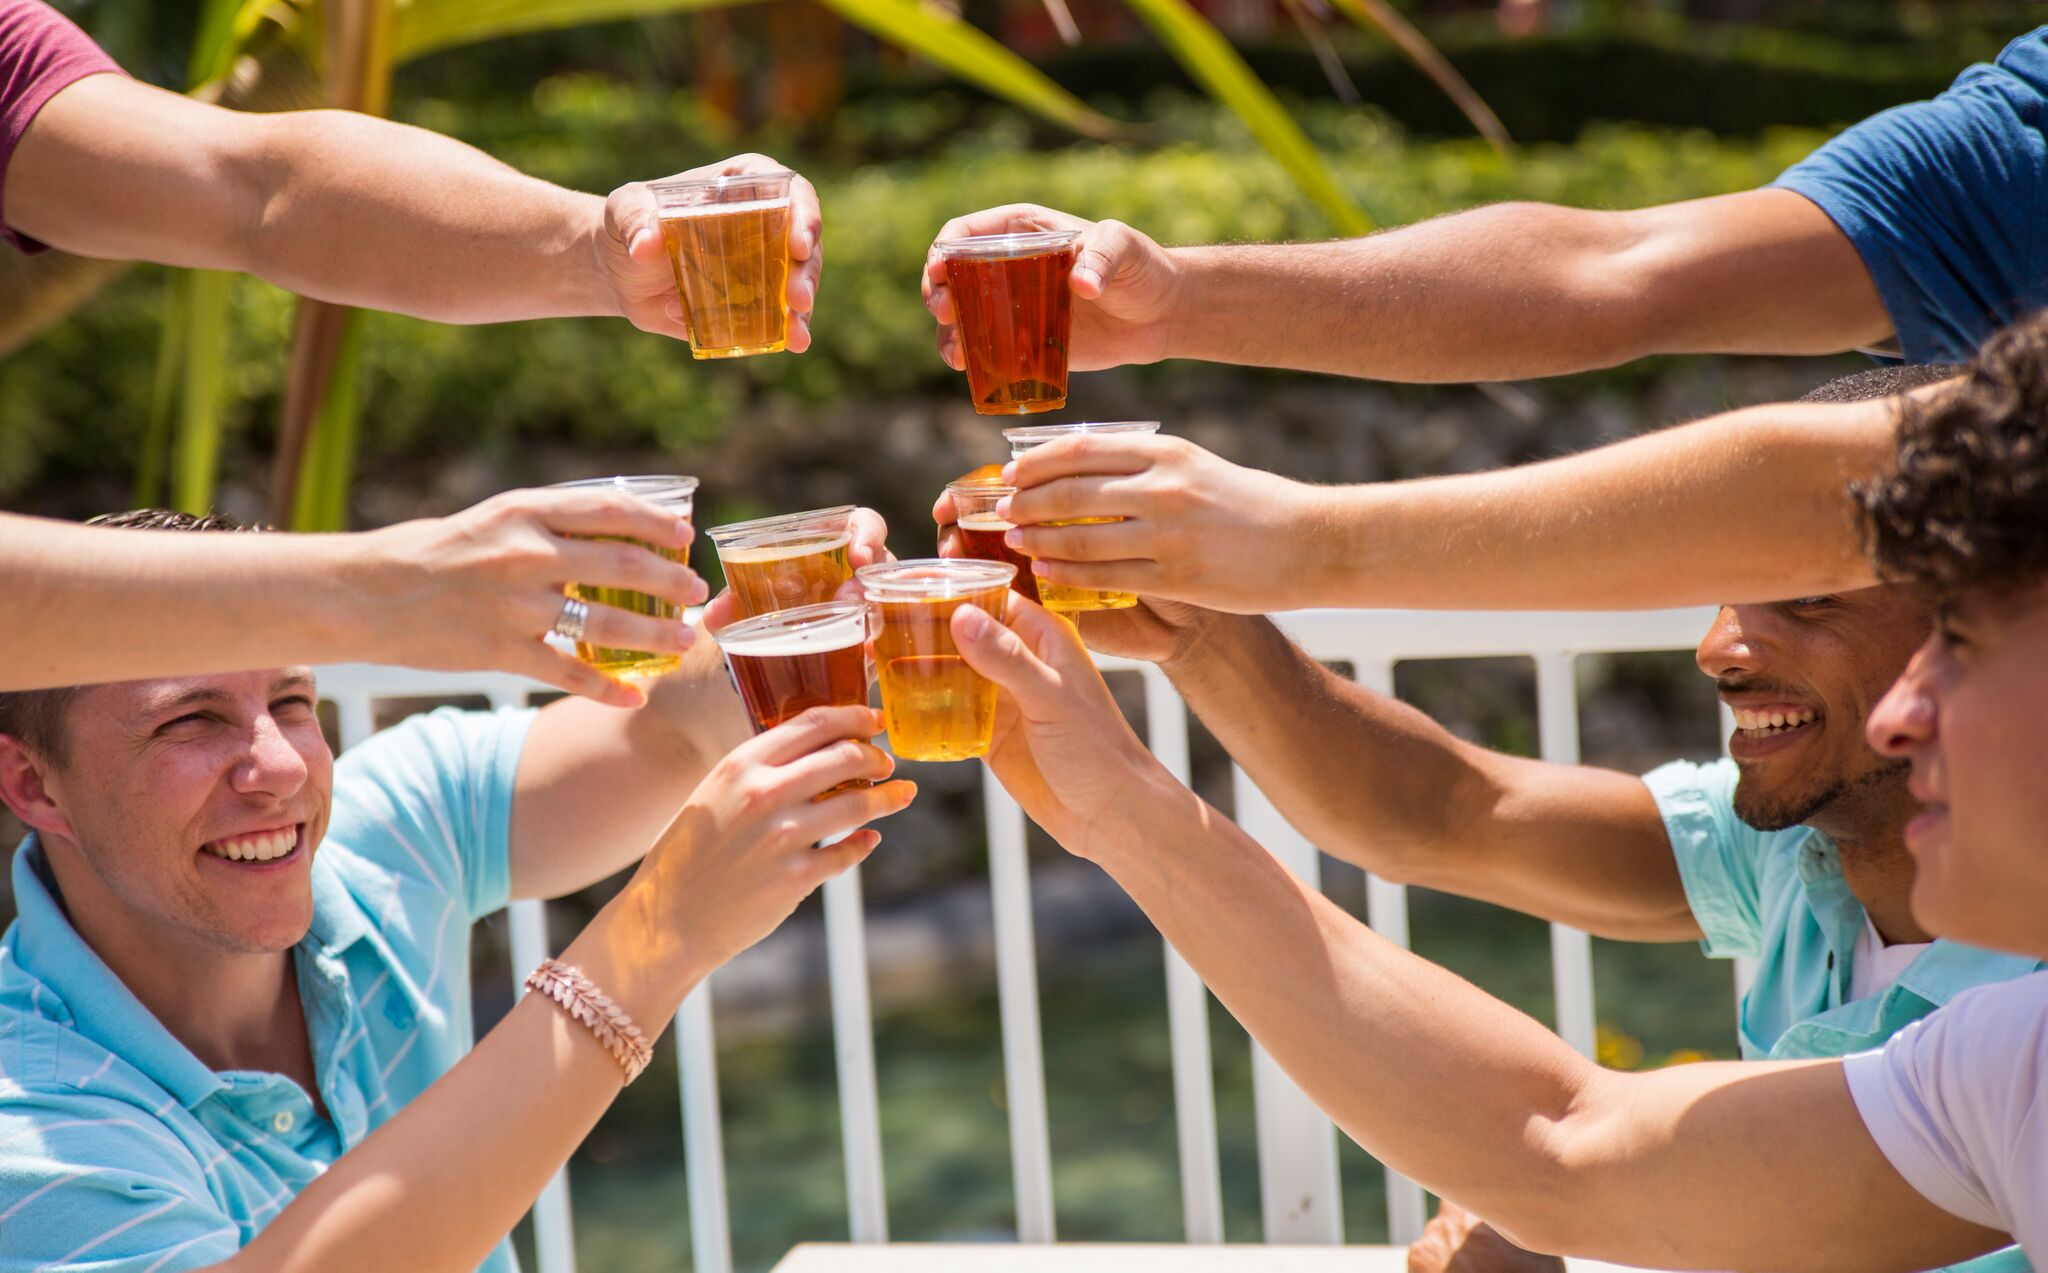 SEAWORLD ORLANDO ANNOUNCES ALL-NEW CRAFT BEER FESTIVAL THIS FALL